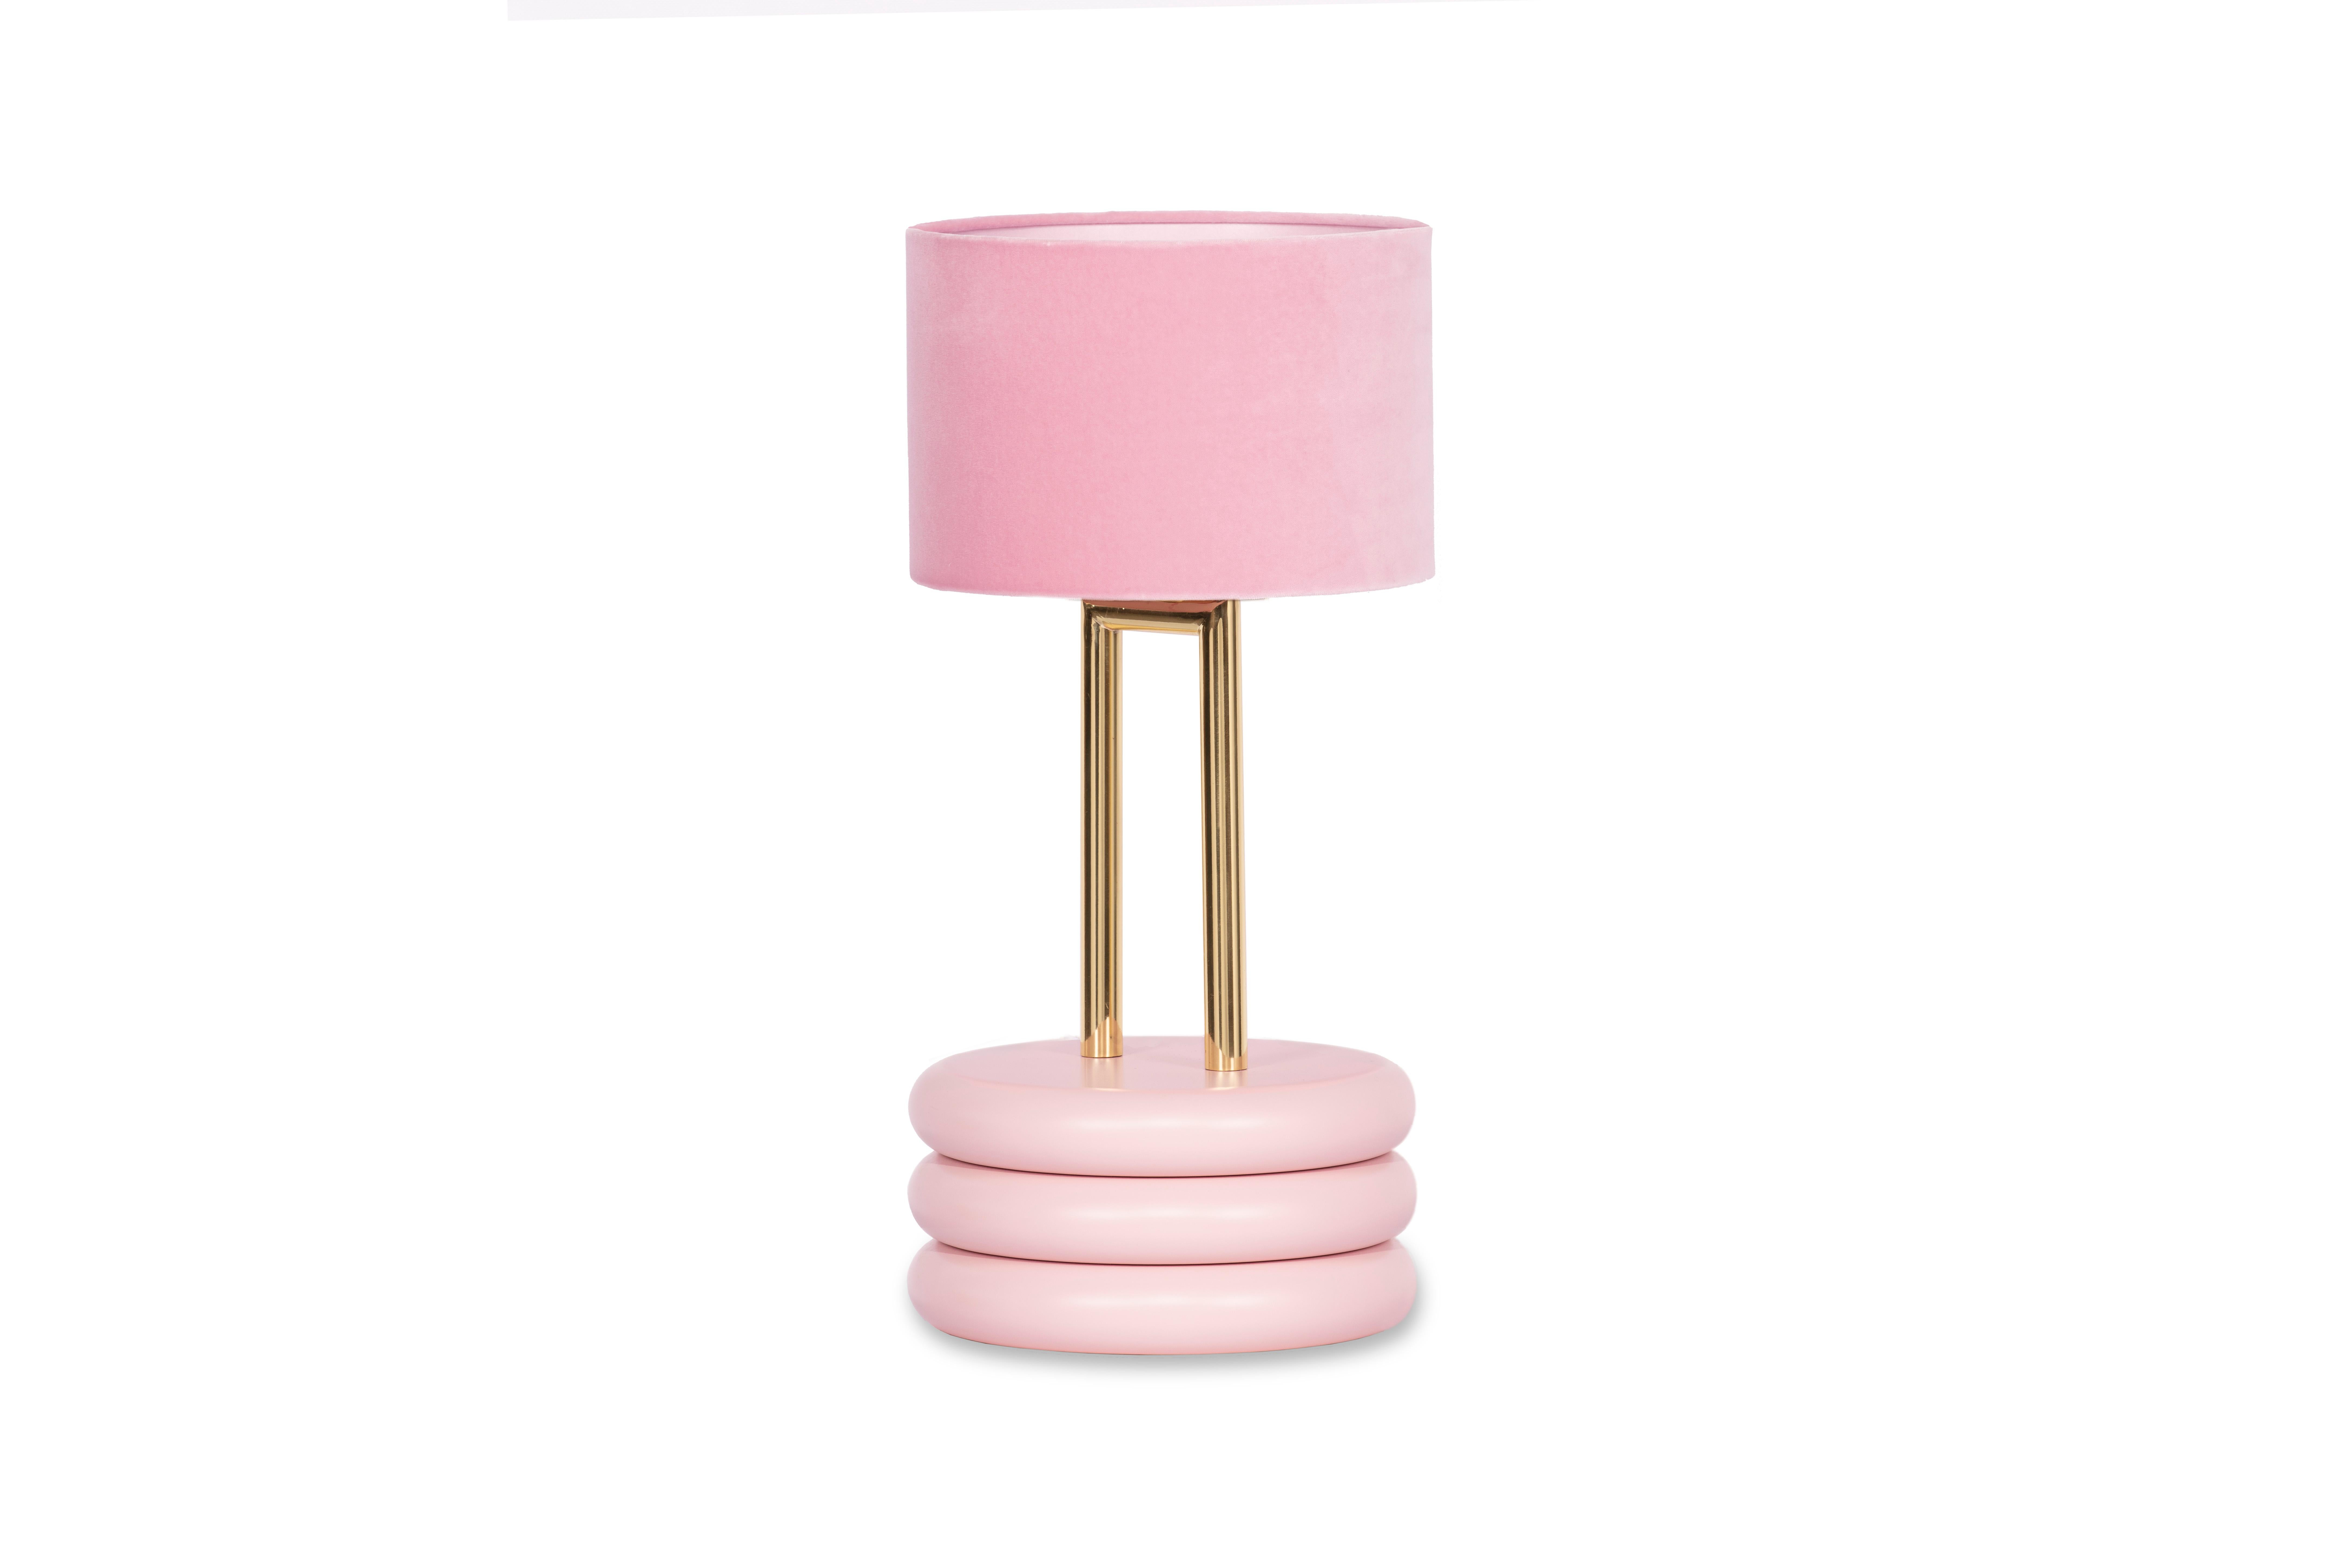 Marshmallow table lamp, Royal Stranger

Dimentions: 30 x 60 x 60 cm
Materials: Brass and velvet

Inspired by the femininity and using bold and vibrant color schemes, this collection is meant to be positive and happy, celebrating the inner